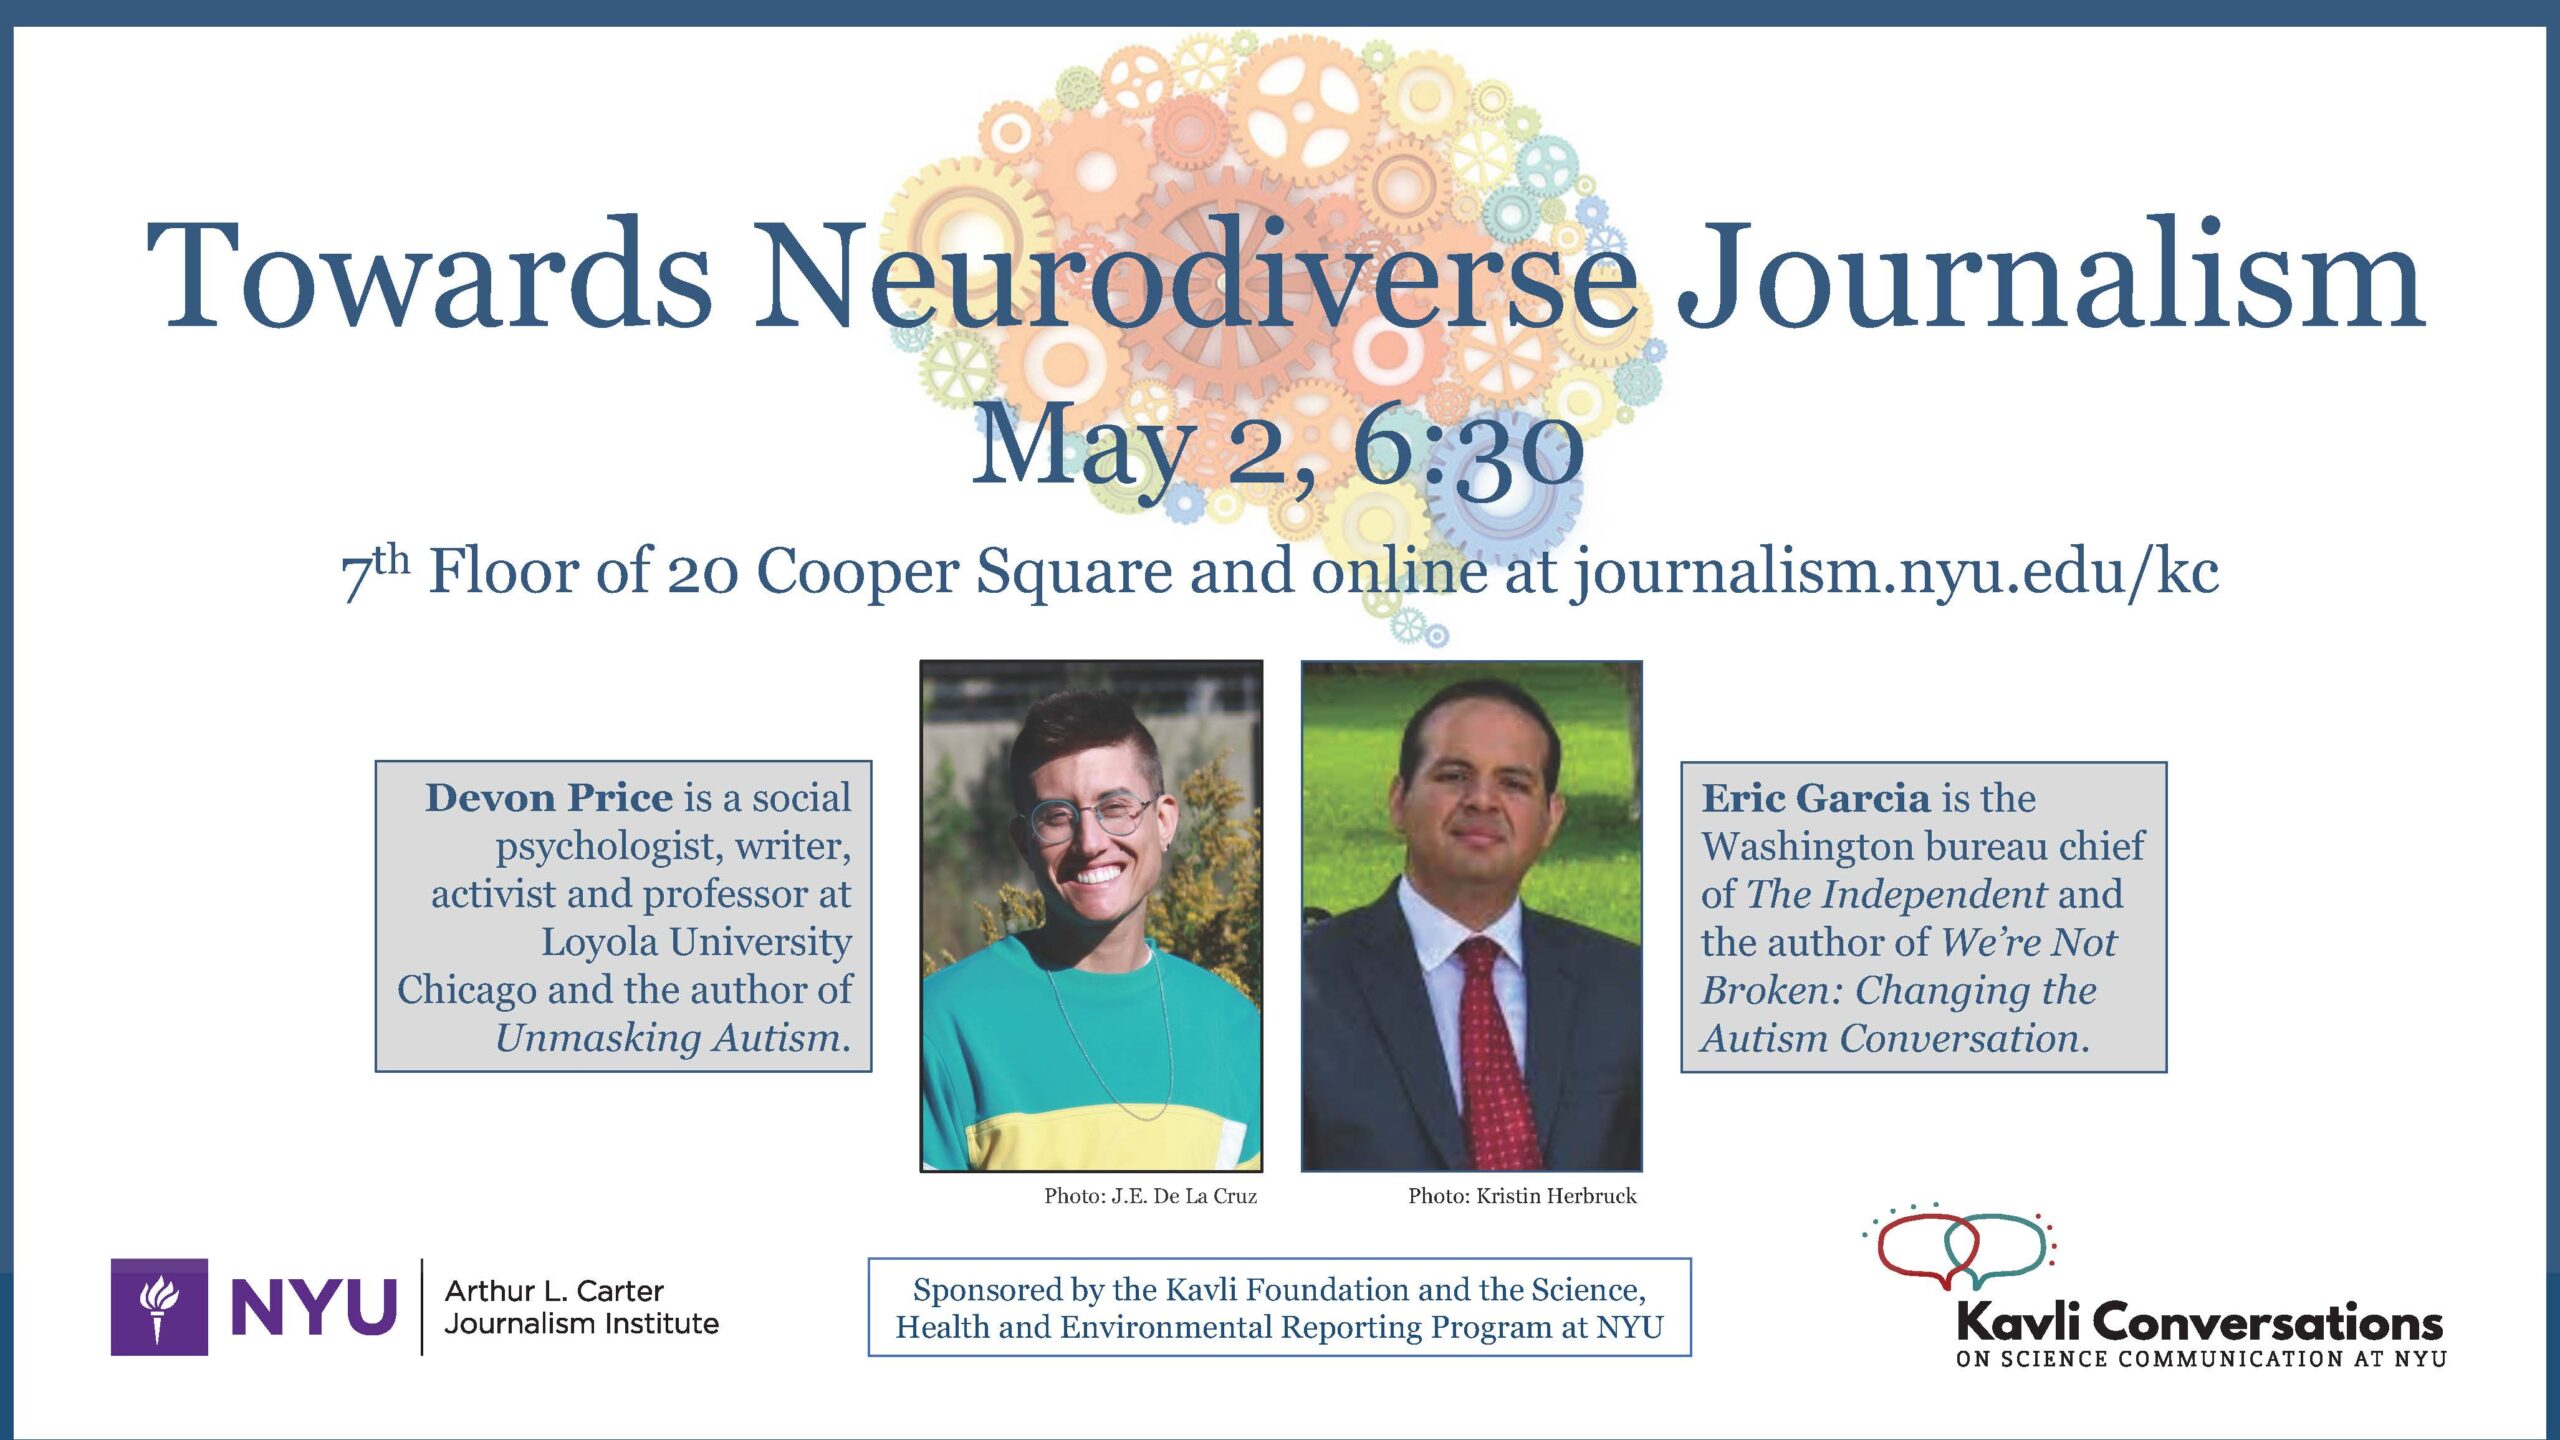 Poster for "Towards Neurodiverse Journalism" event